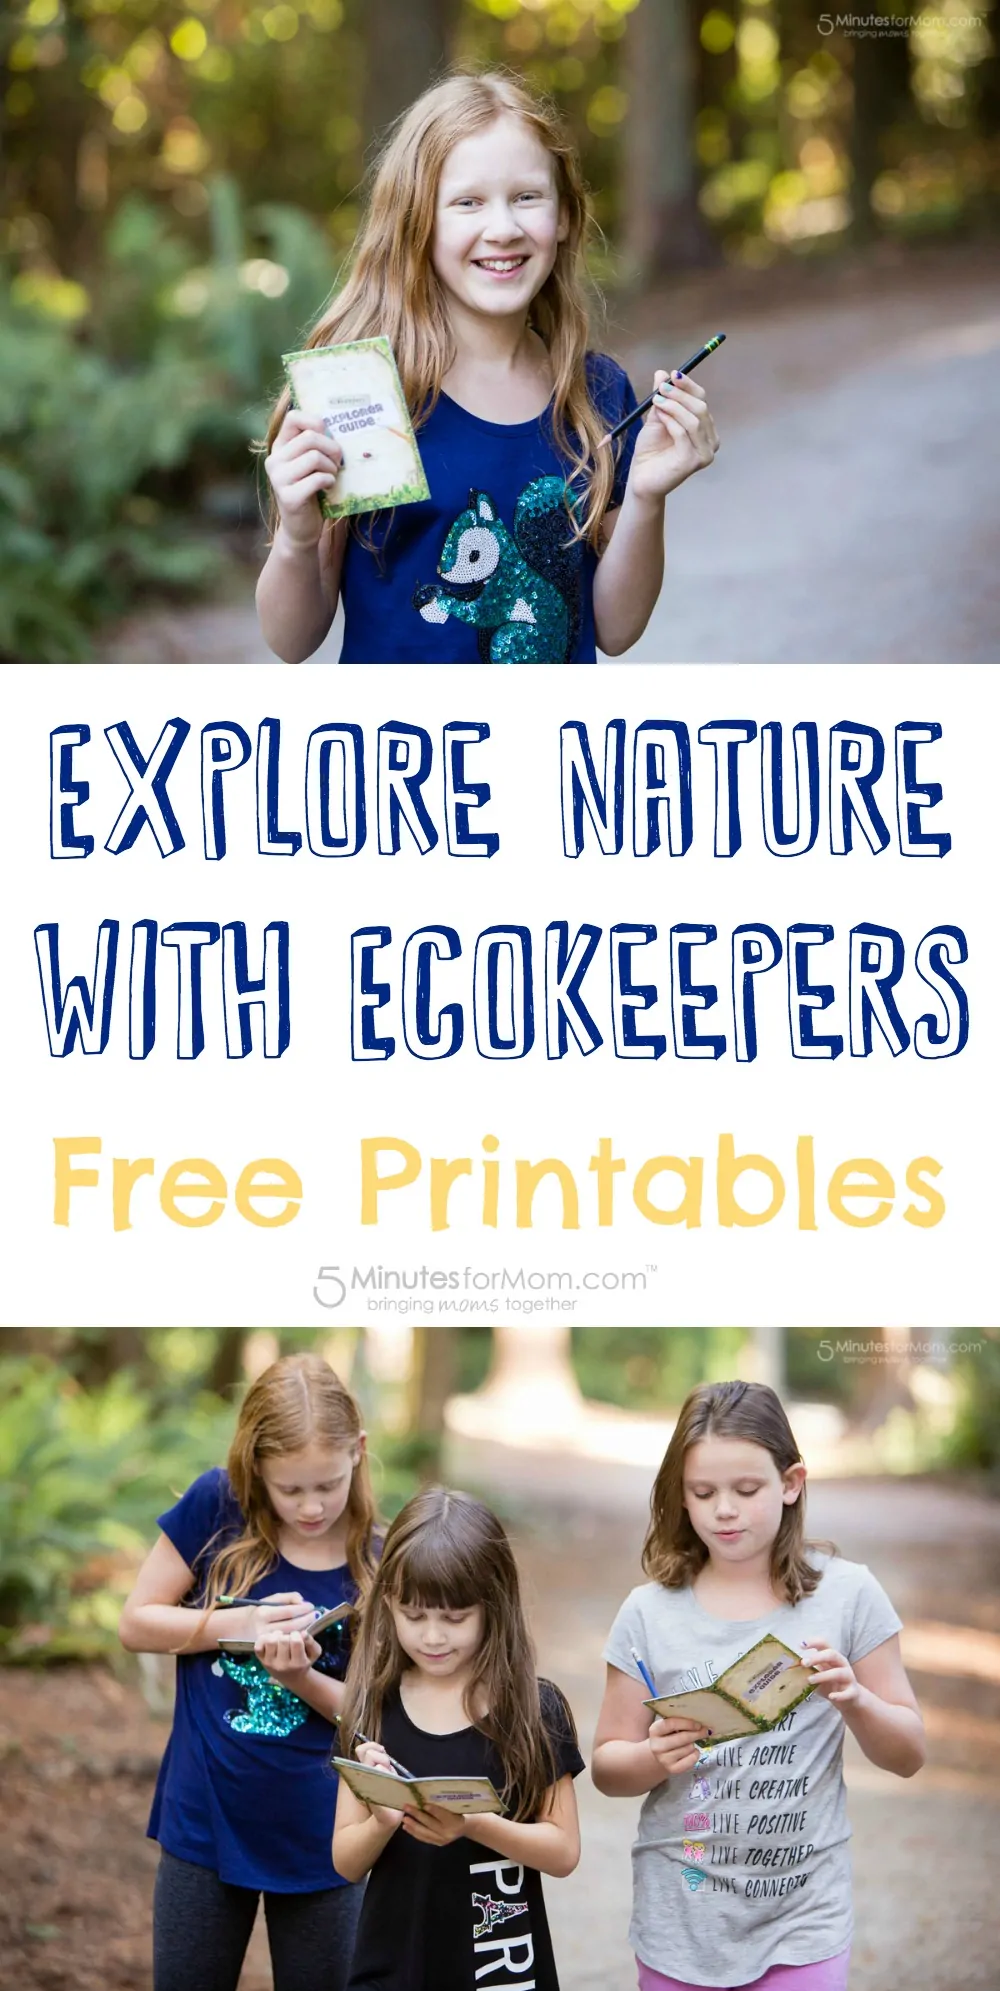 Explore nature with ecokeepers